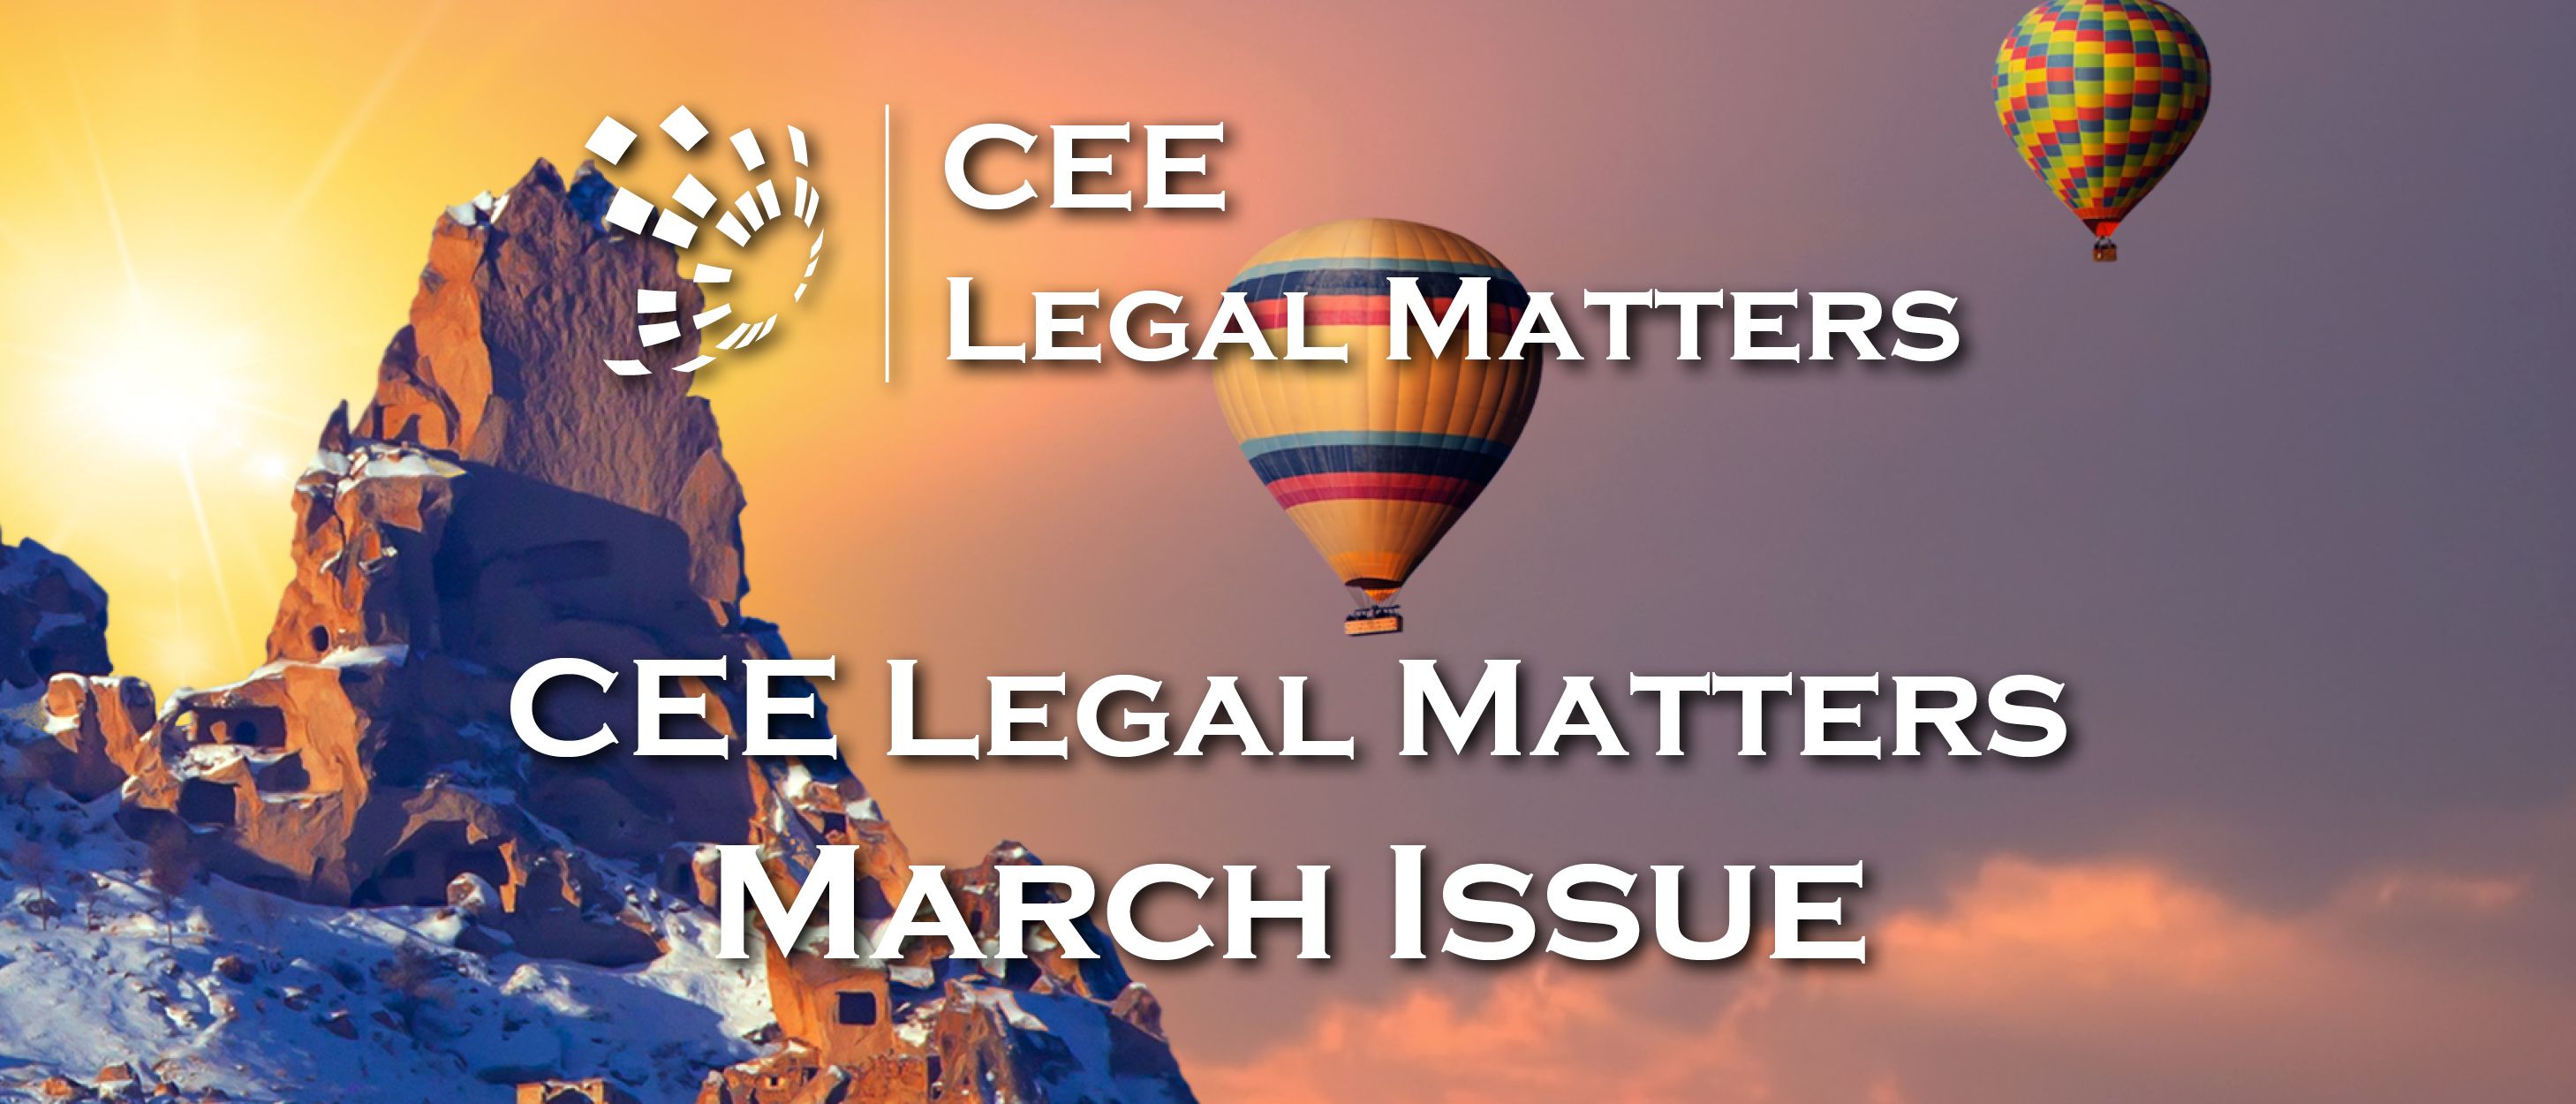 A Renewed Sense of Hope is in the Air: March Issue is Out!